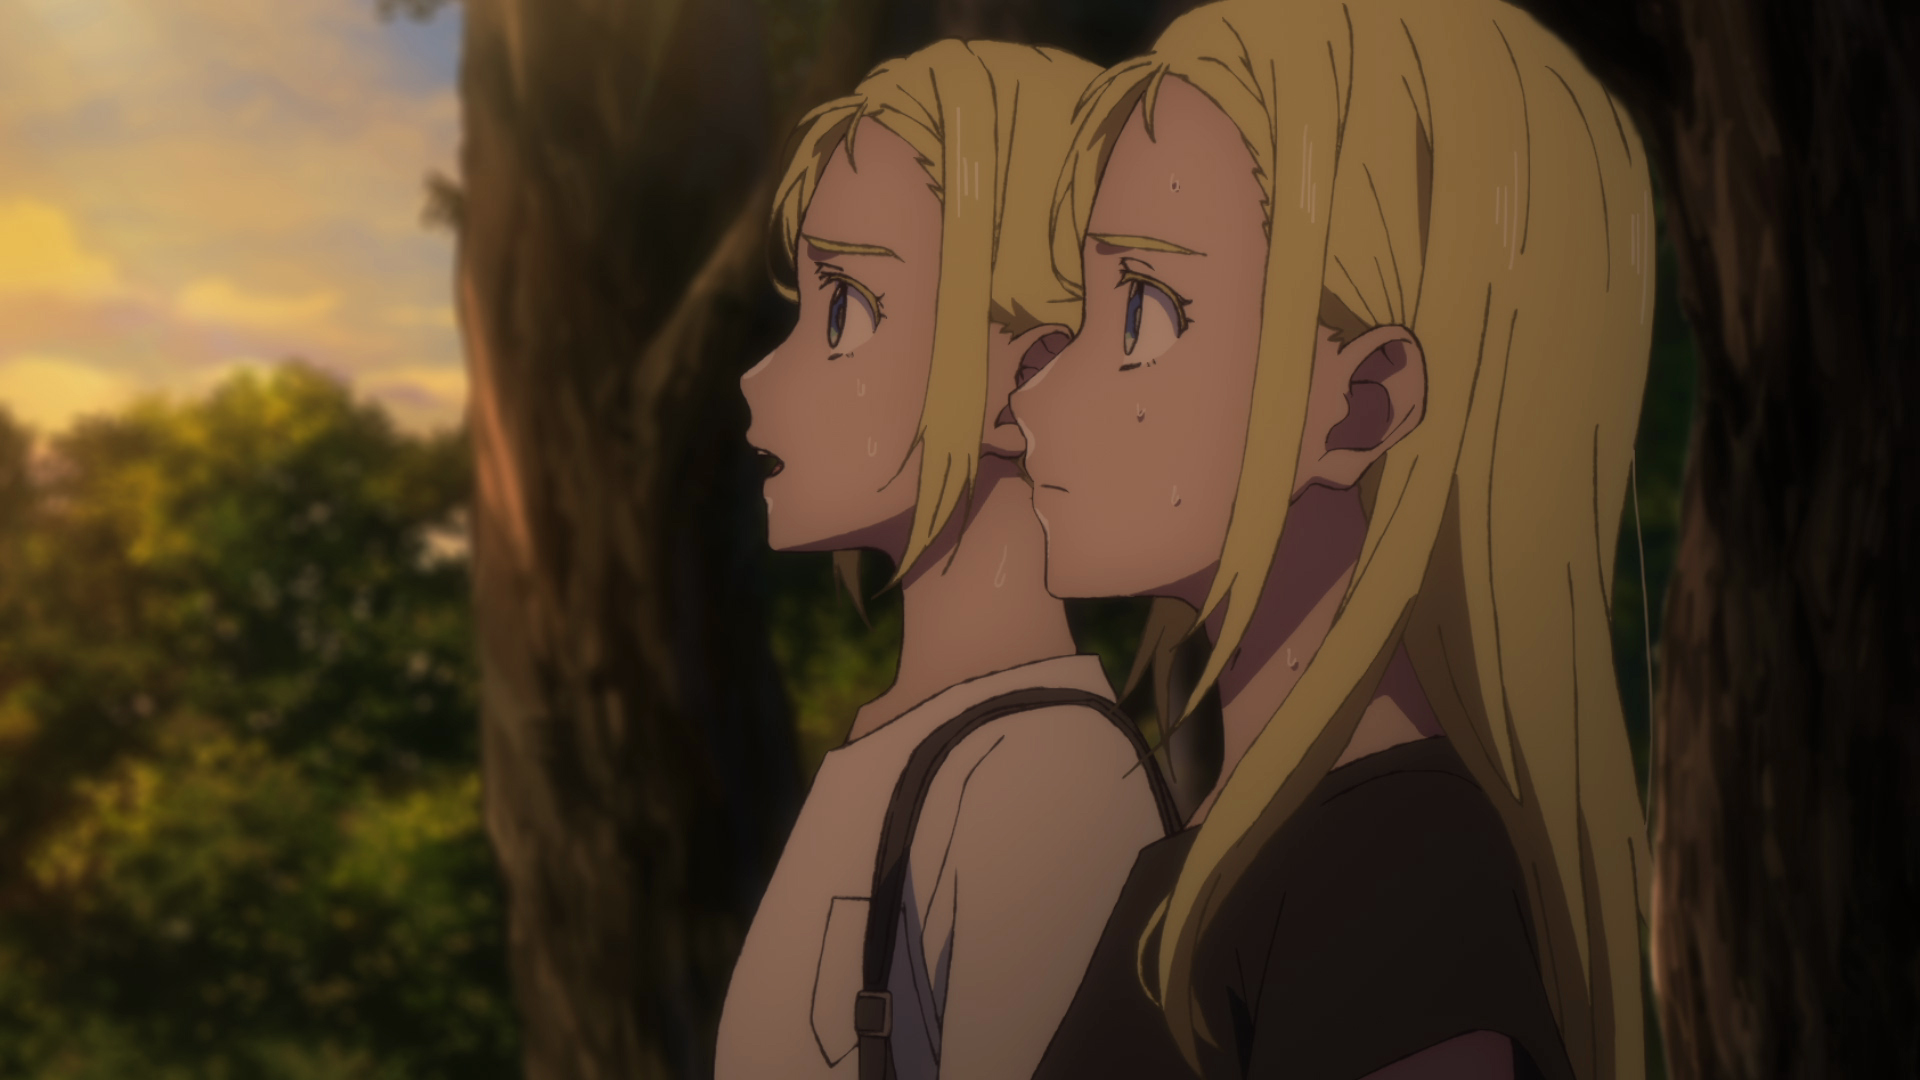 Summer Time Rendering Reveals Episode 9 Preview - Anime Corner